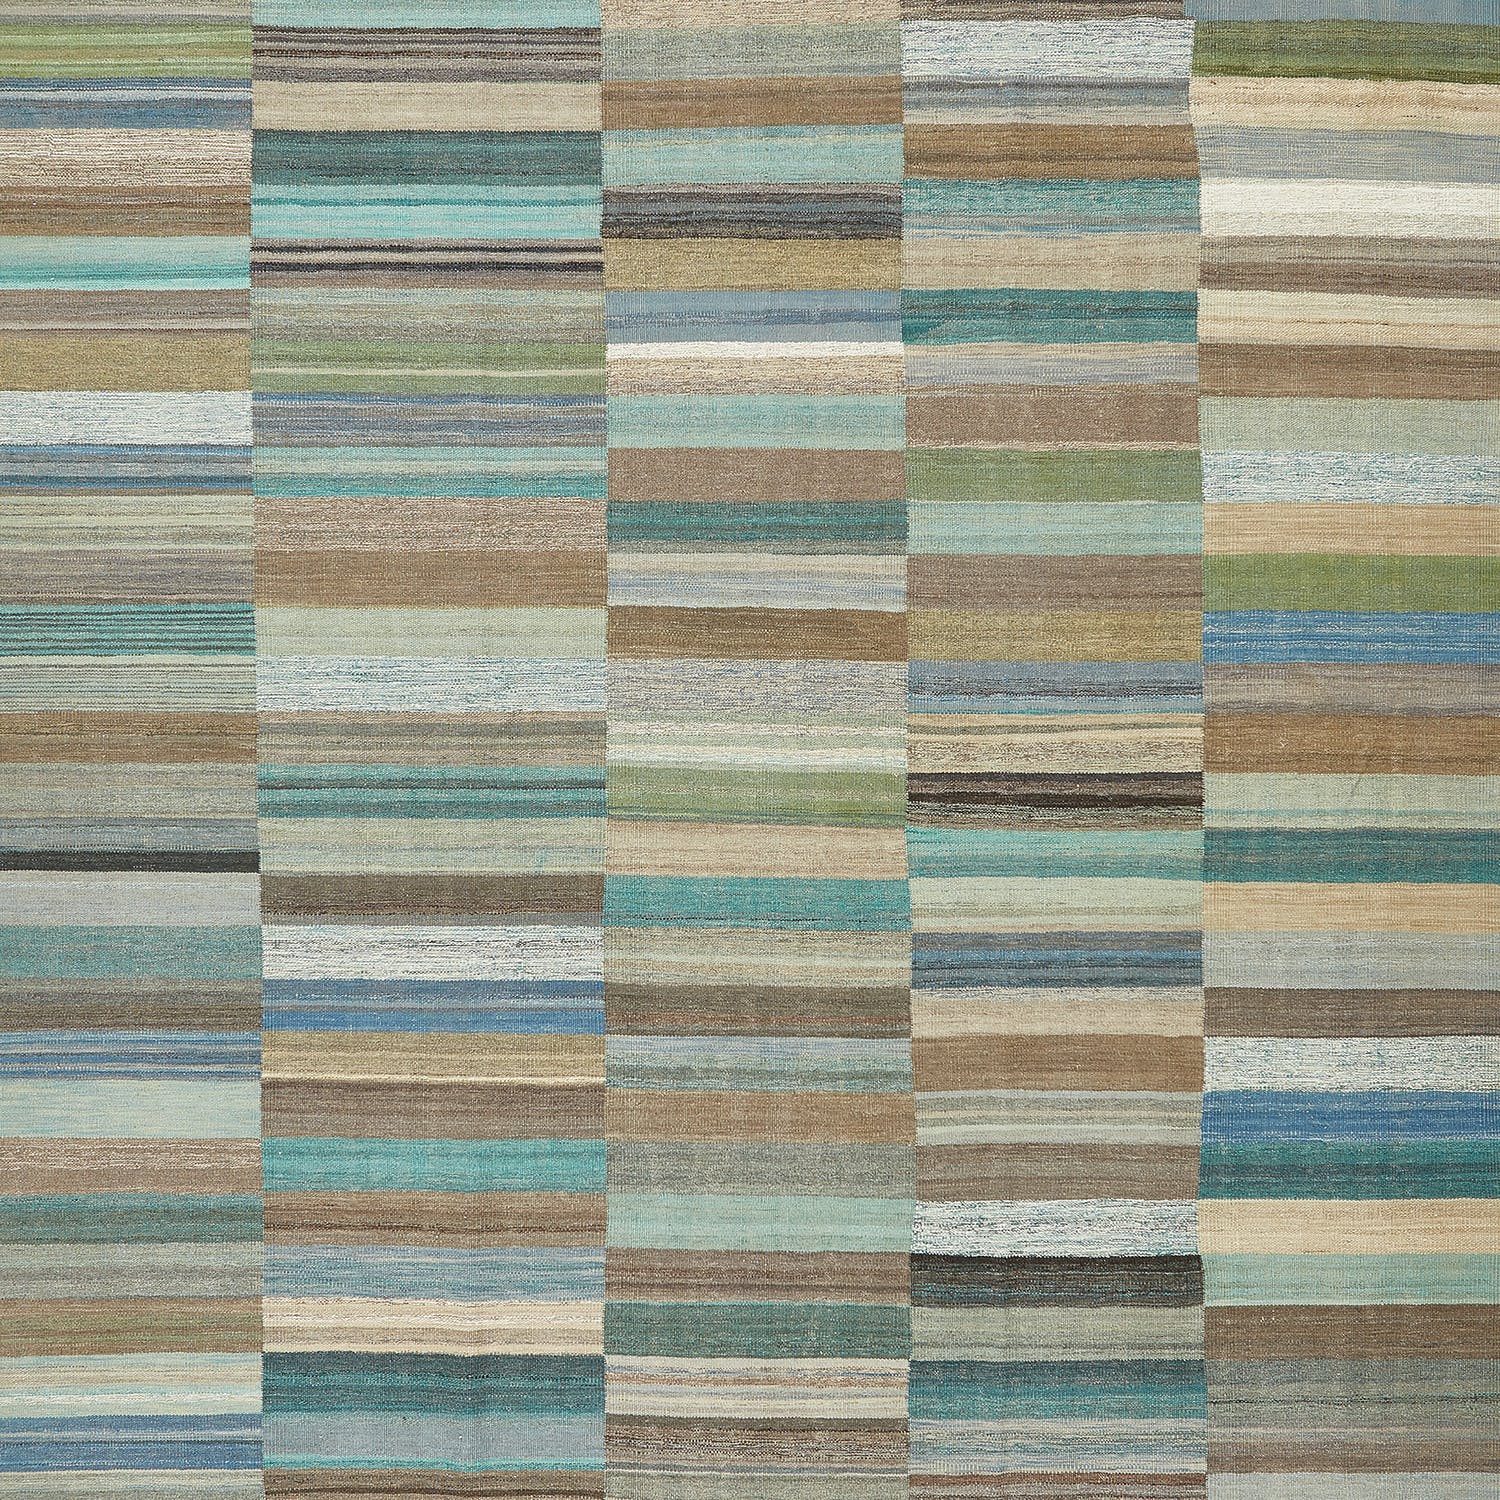 Abstract textured surface with horizontal stripes in various colors and patterns.